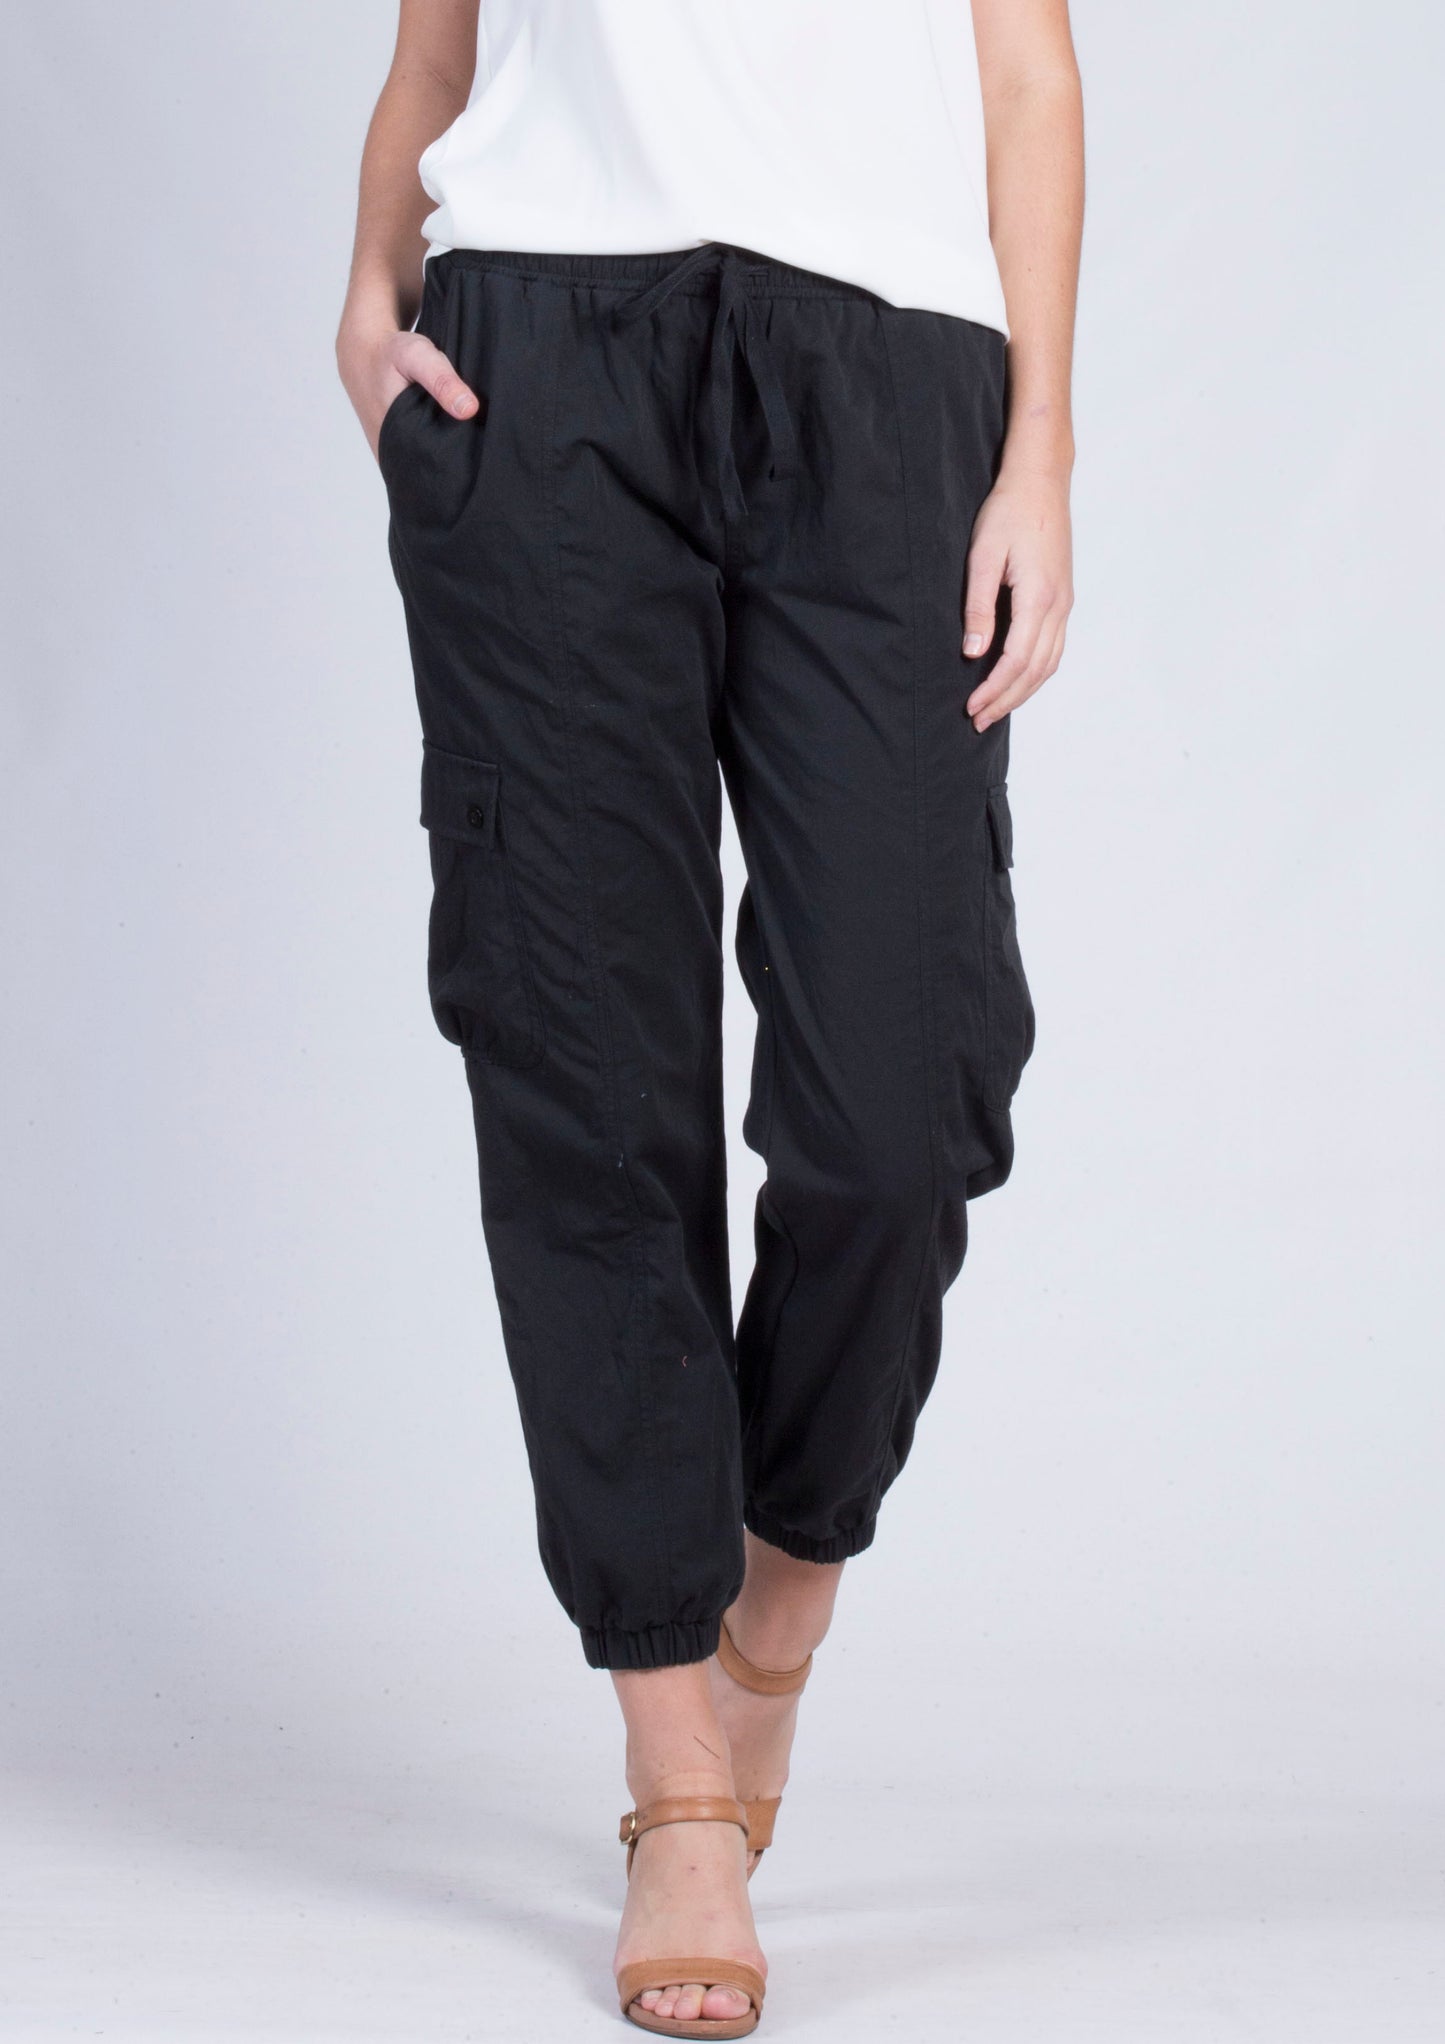 YW2168-1SS Cargo Joggers (Pack)